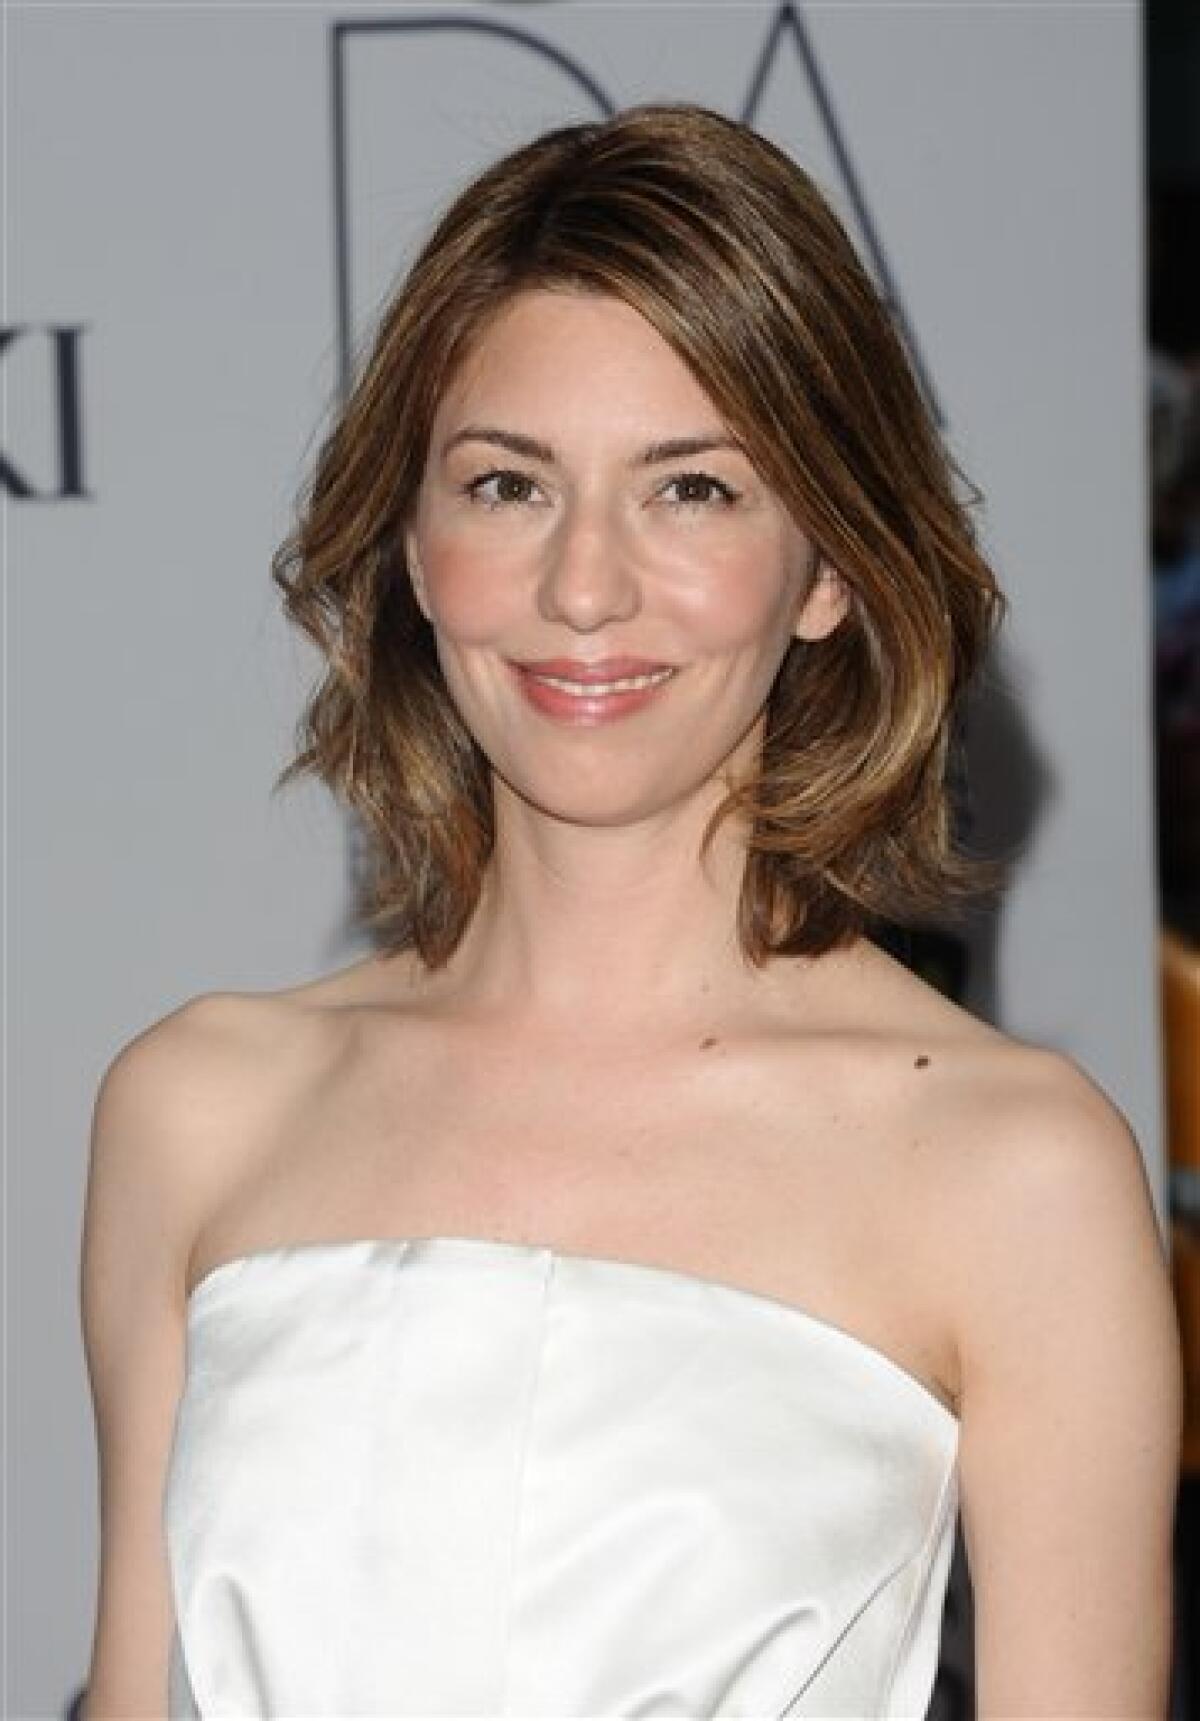 Sofia Coppola has a new Godfather-in-law after Italy wedding